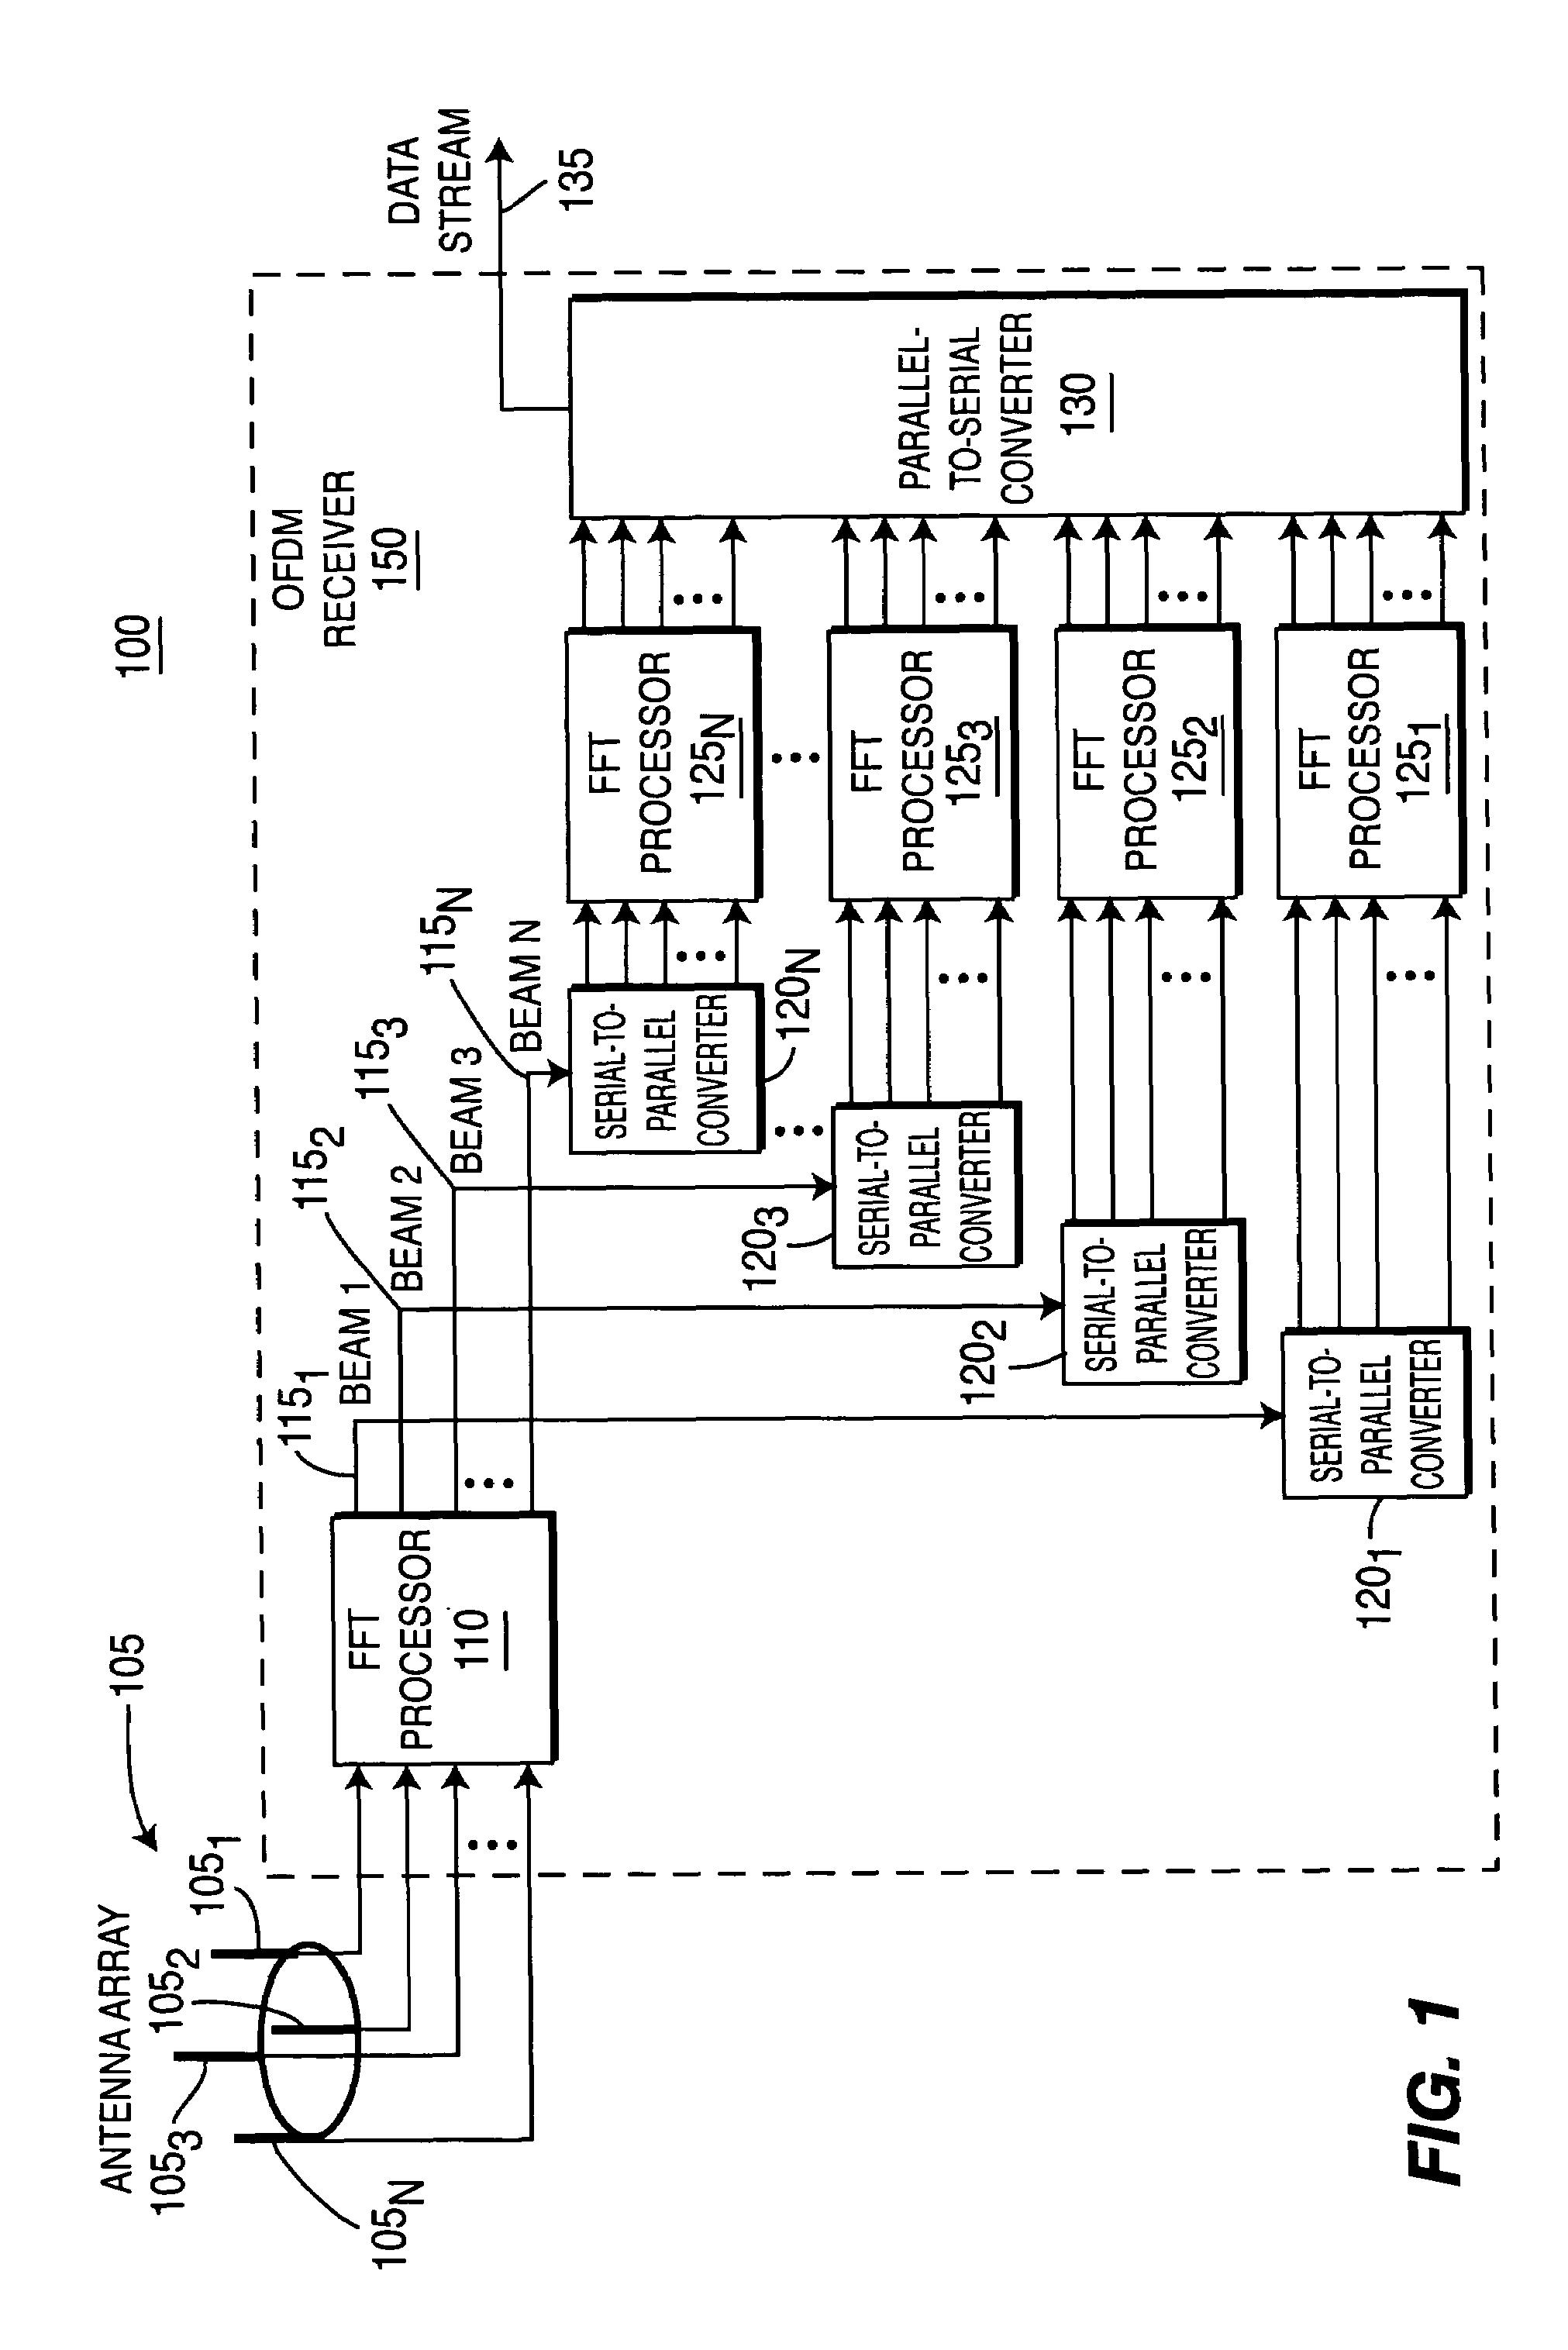 Wireless communication apparatus using fast fourier transforms to create, optimize and incorporate a beam space antenna array in an orthogonal frequency division multiplexing receiver